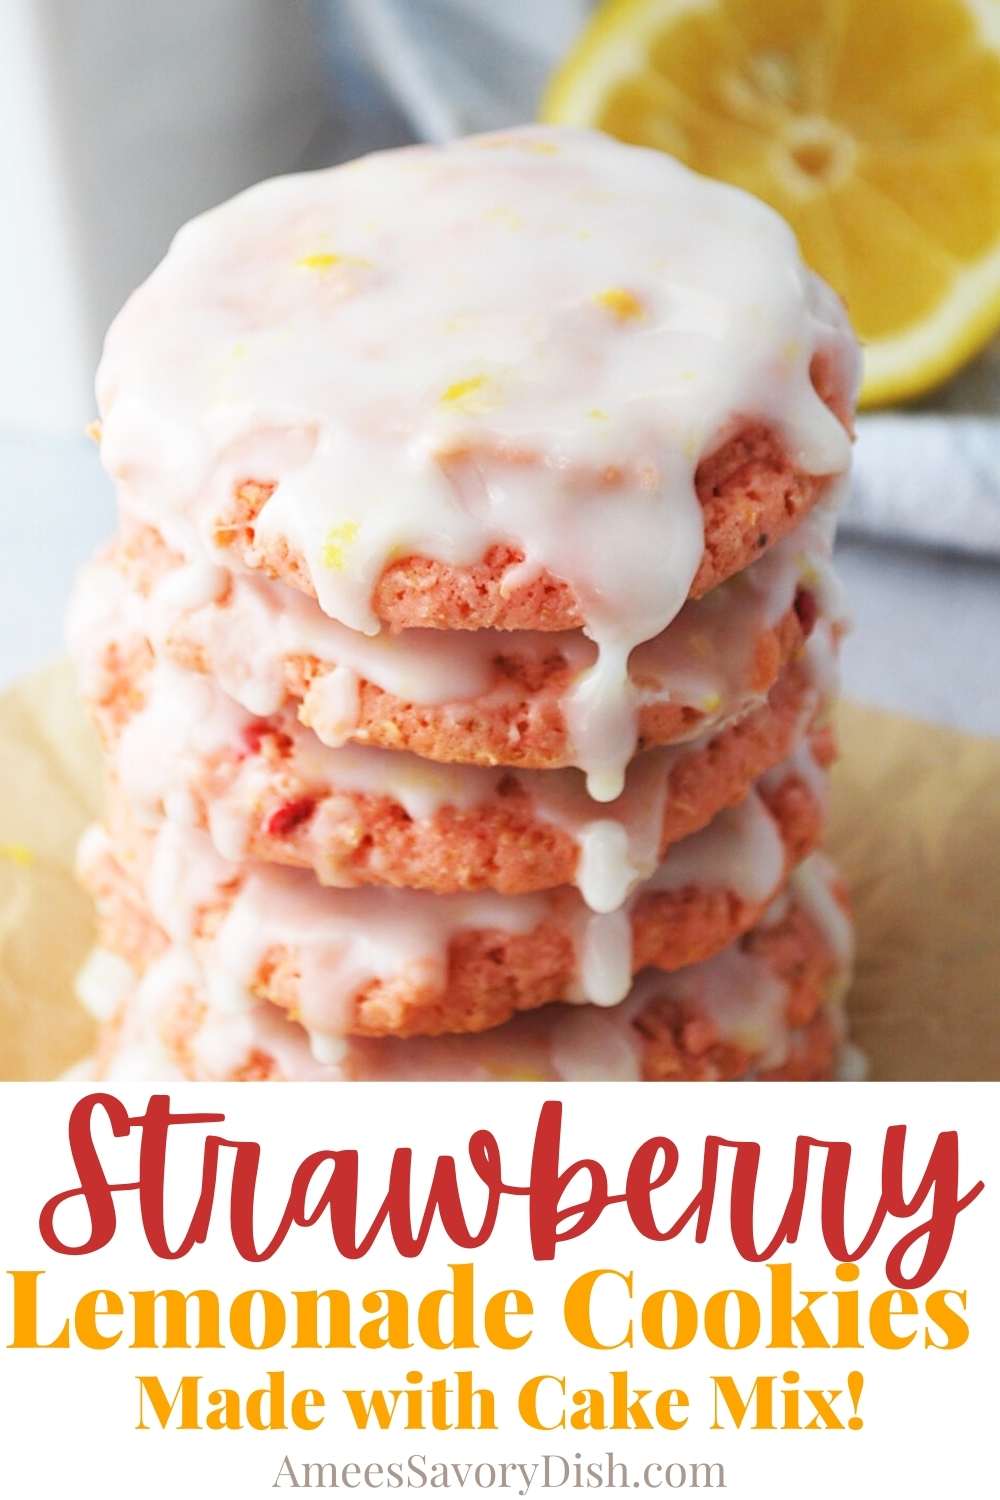 These delicious Strawberry Lemonade cookies are incredibly easy to make using premade strawberry cake mix, fresh lemon juice, and lemon zest. This easy cake mix cookie recipe might become your new summertime favorite! via @Ameessavorydish